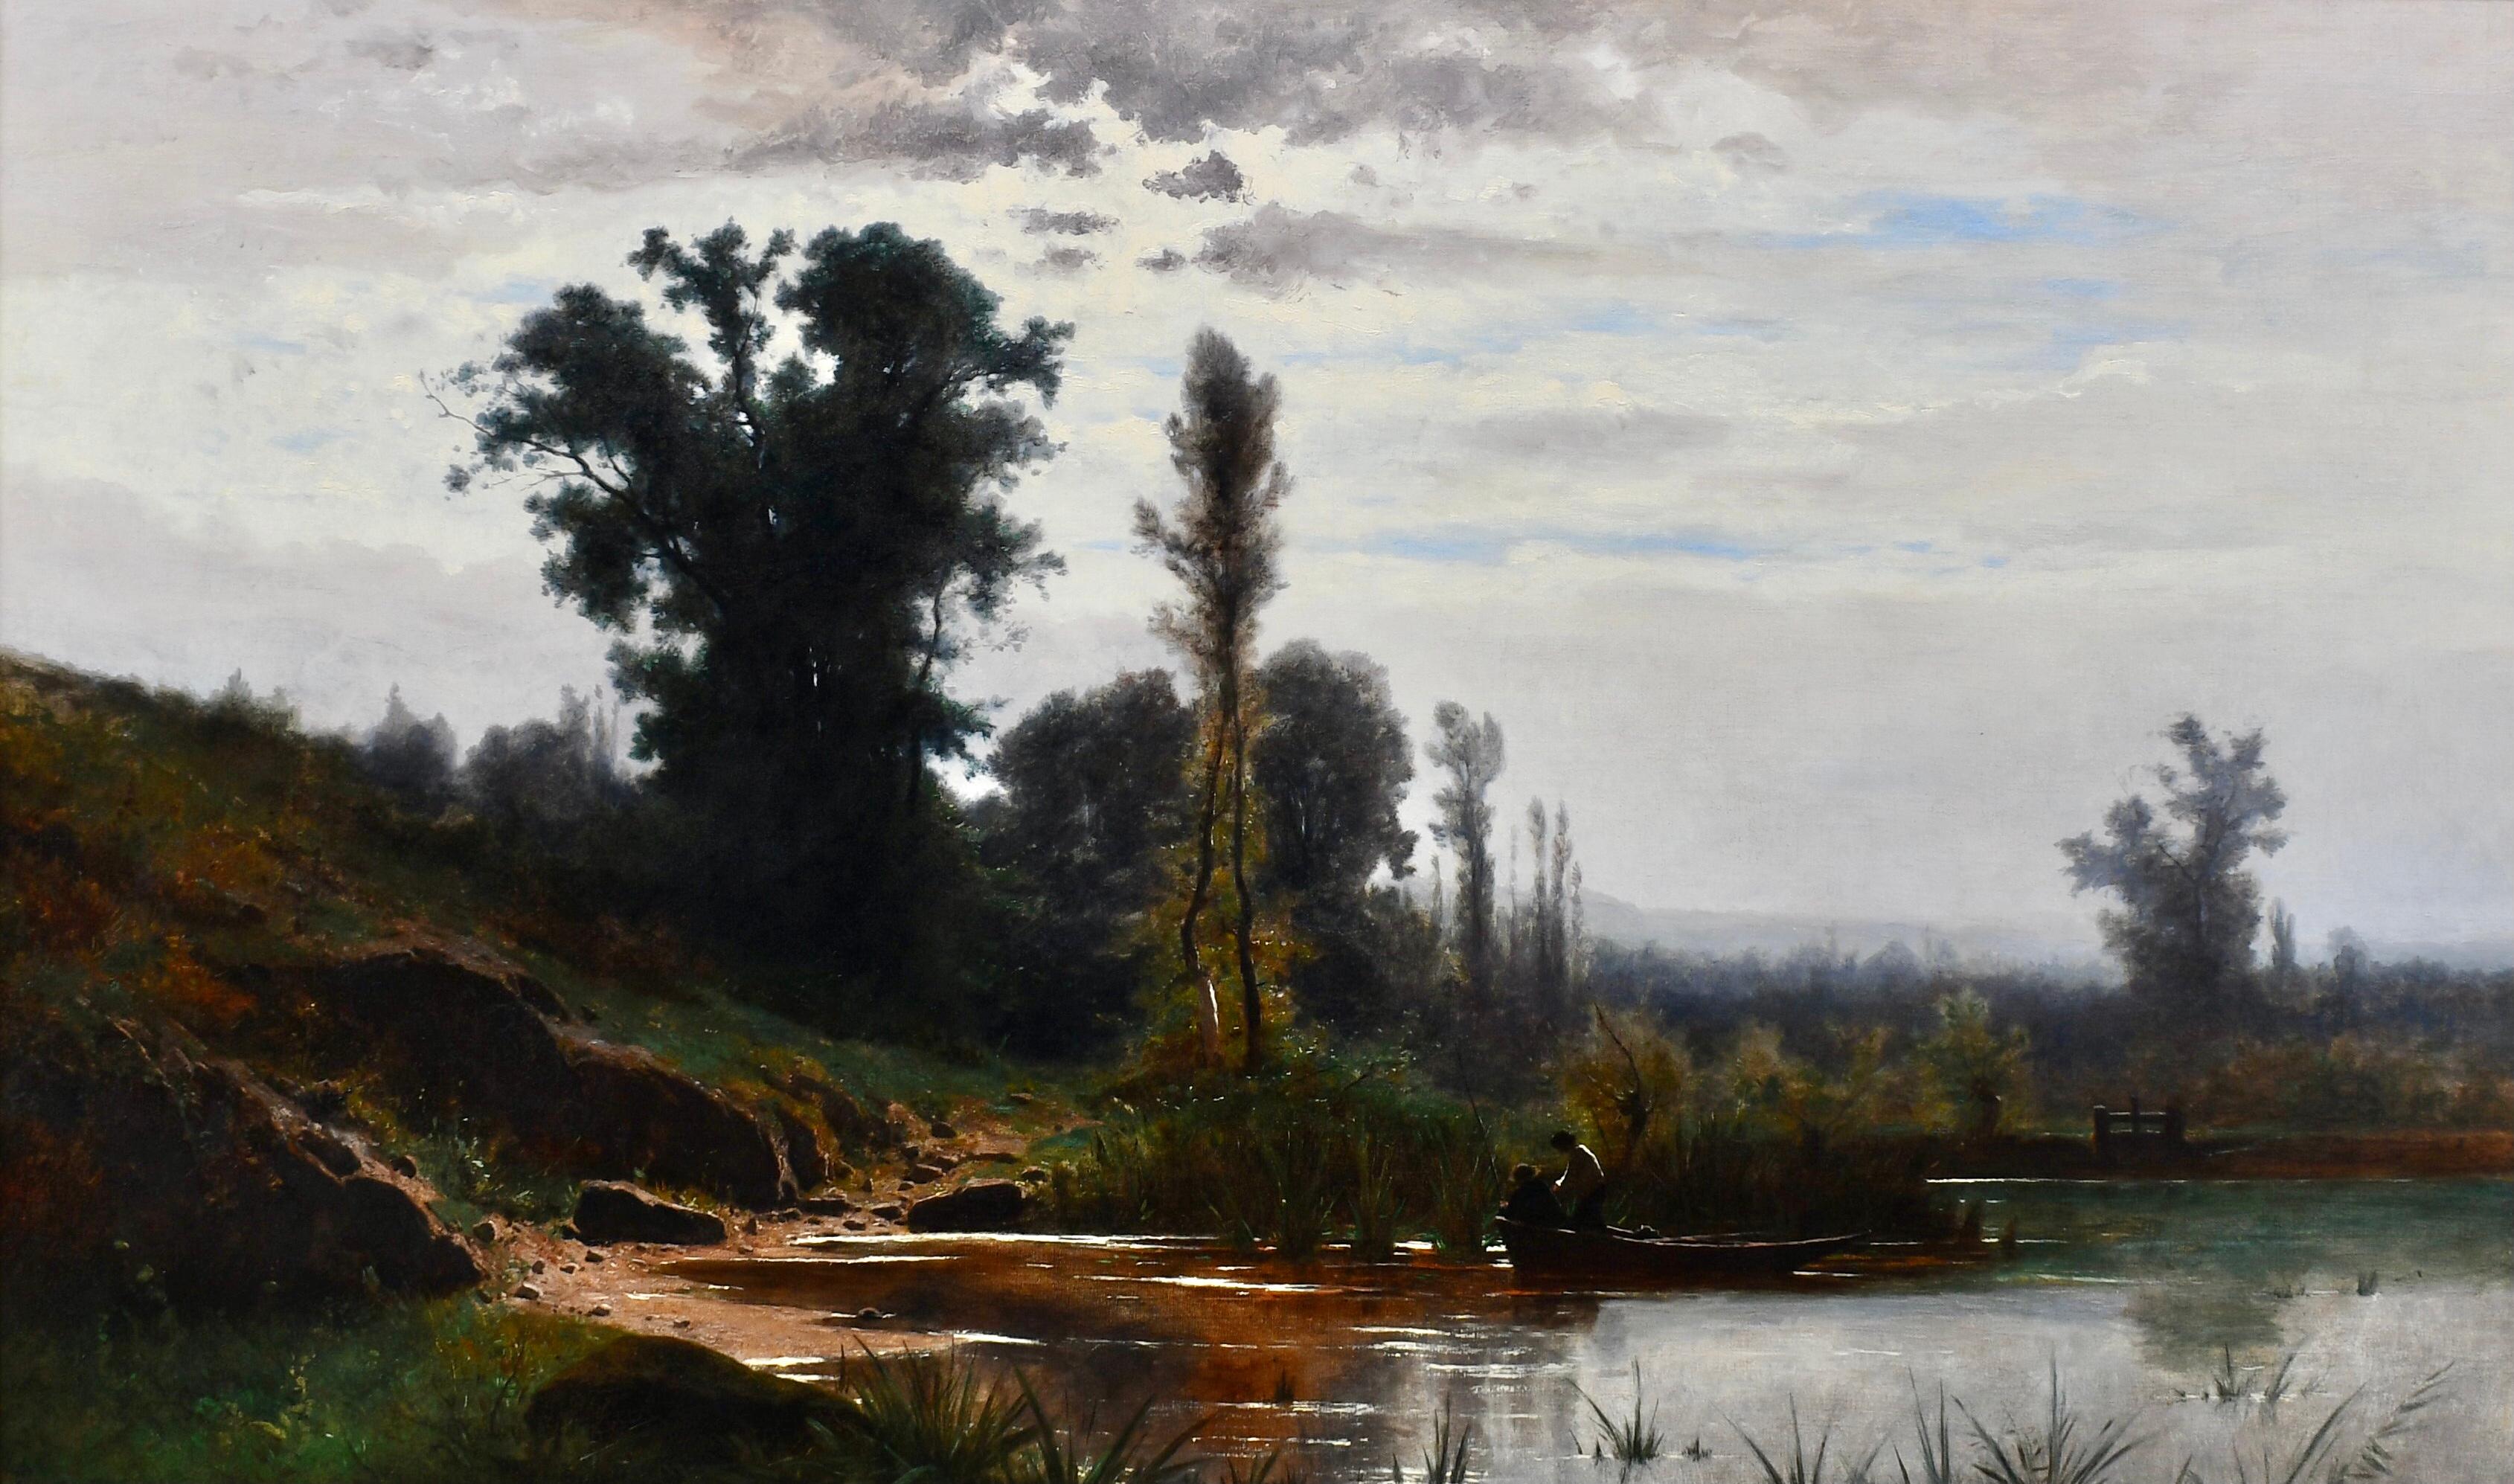 On the River Bank - Painting by Gustave Castan